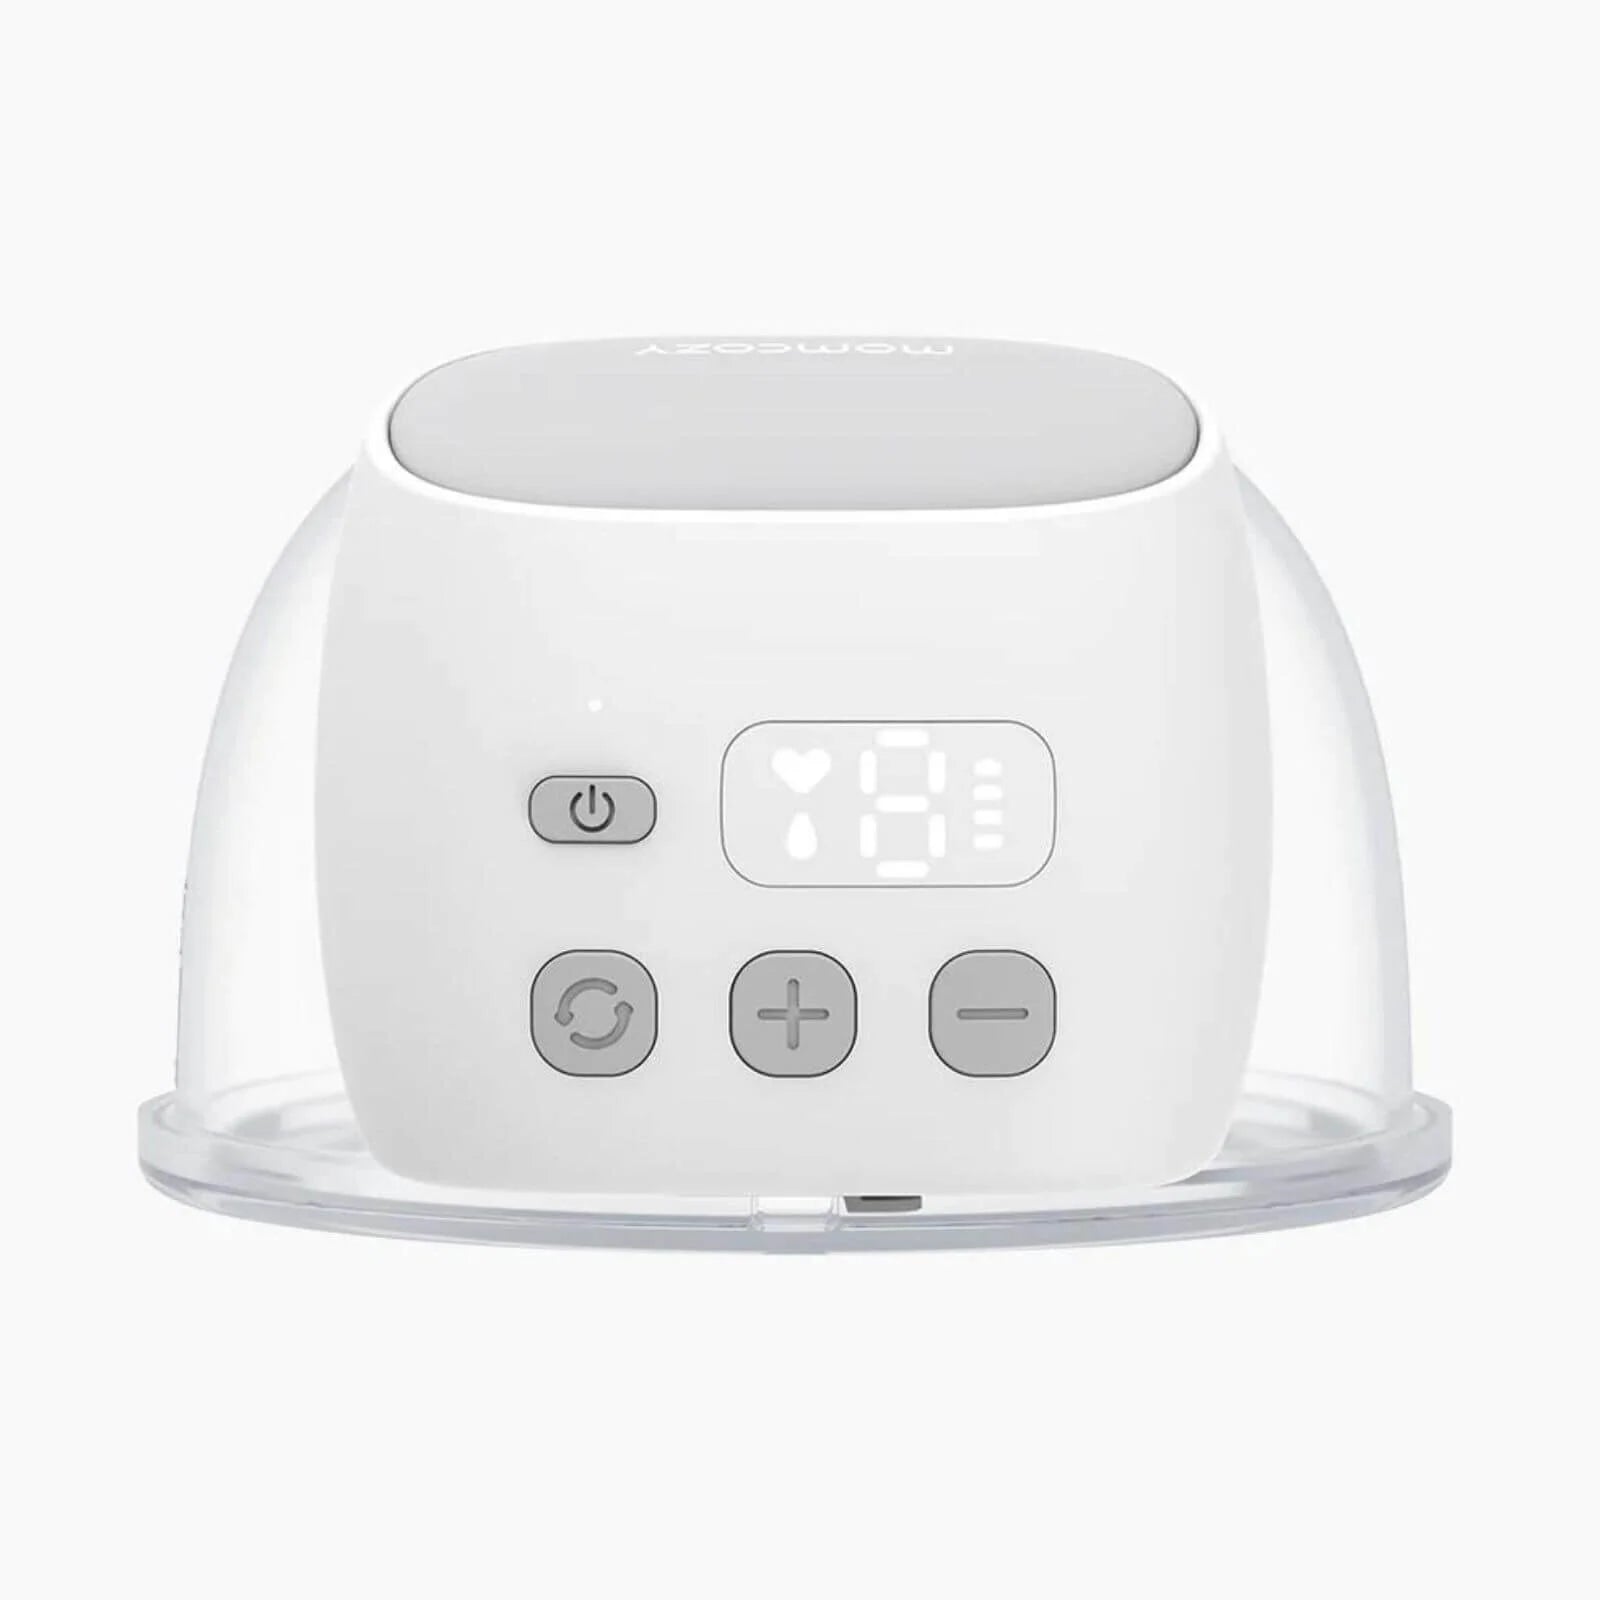 Momcozy Hands Free Wearable Breast Pump S9 Pro, Electric Breast